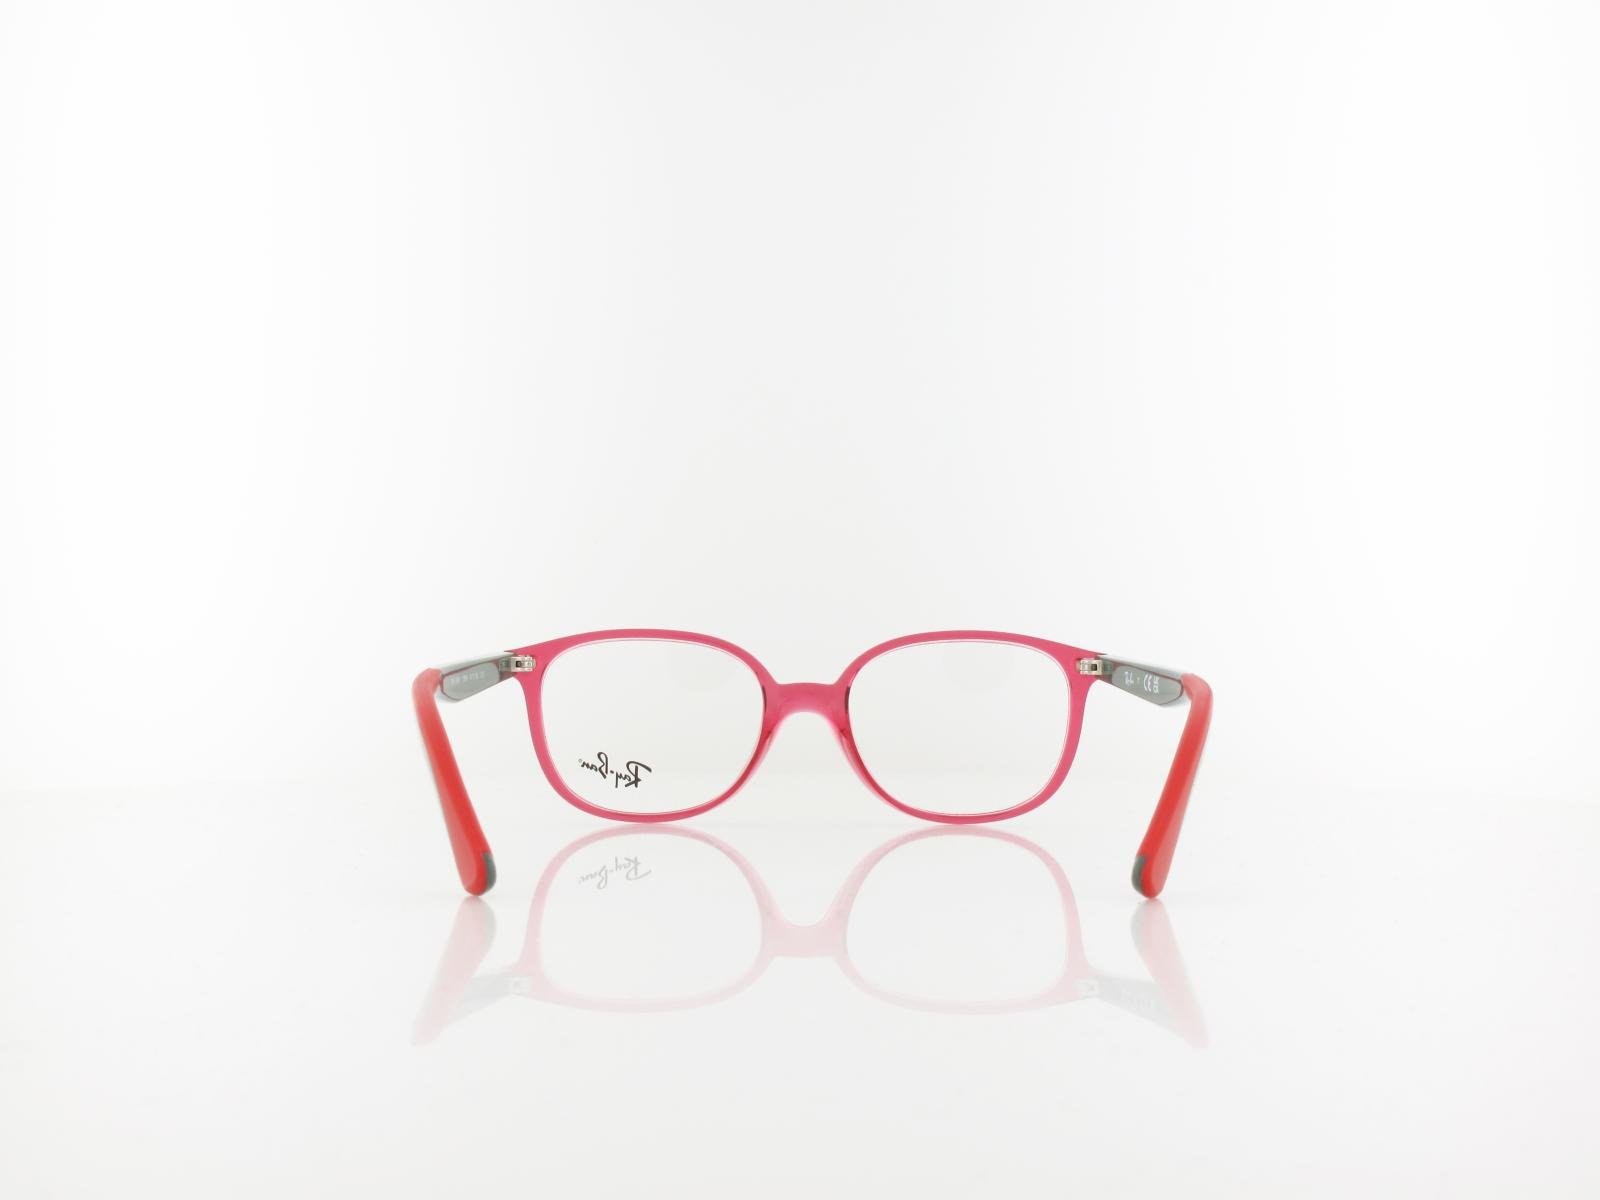 Ray Ban | RY1598 3886 47 | trasparent red